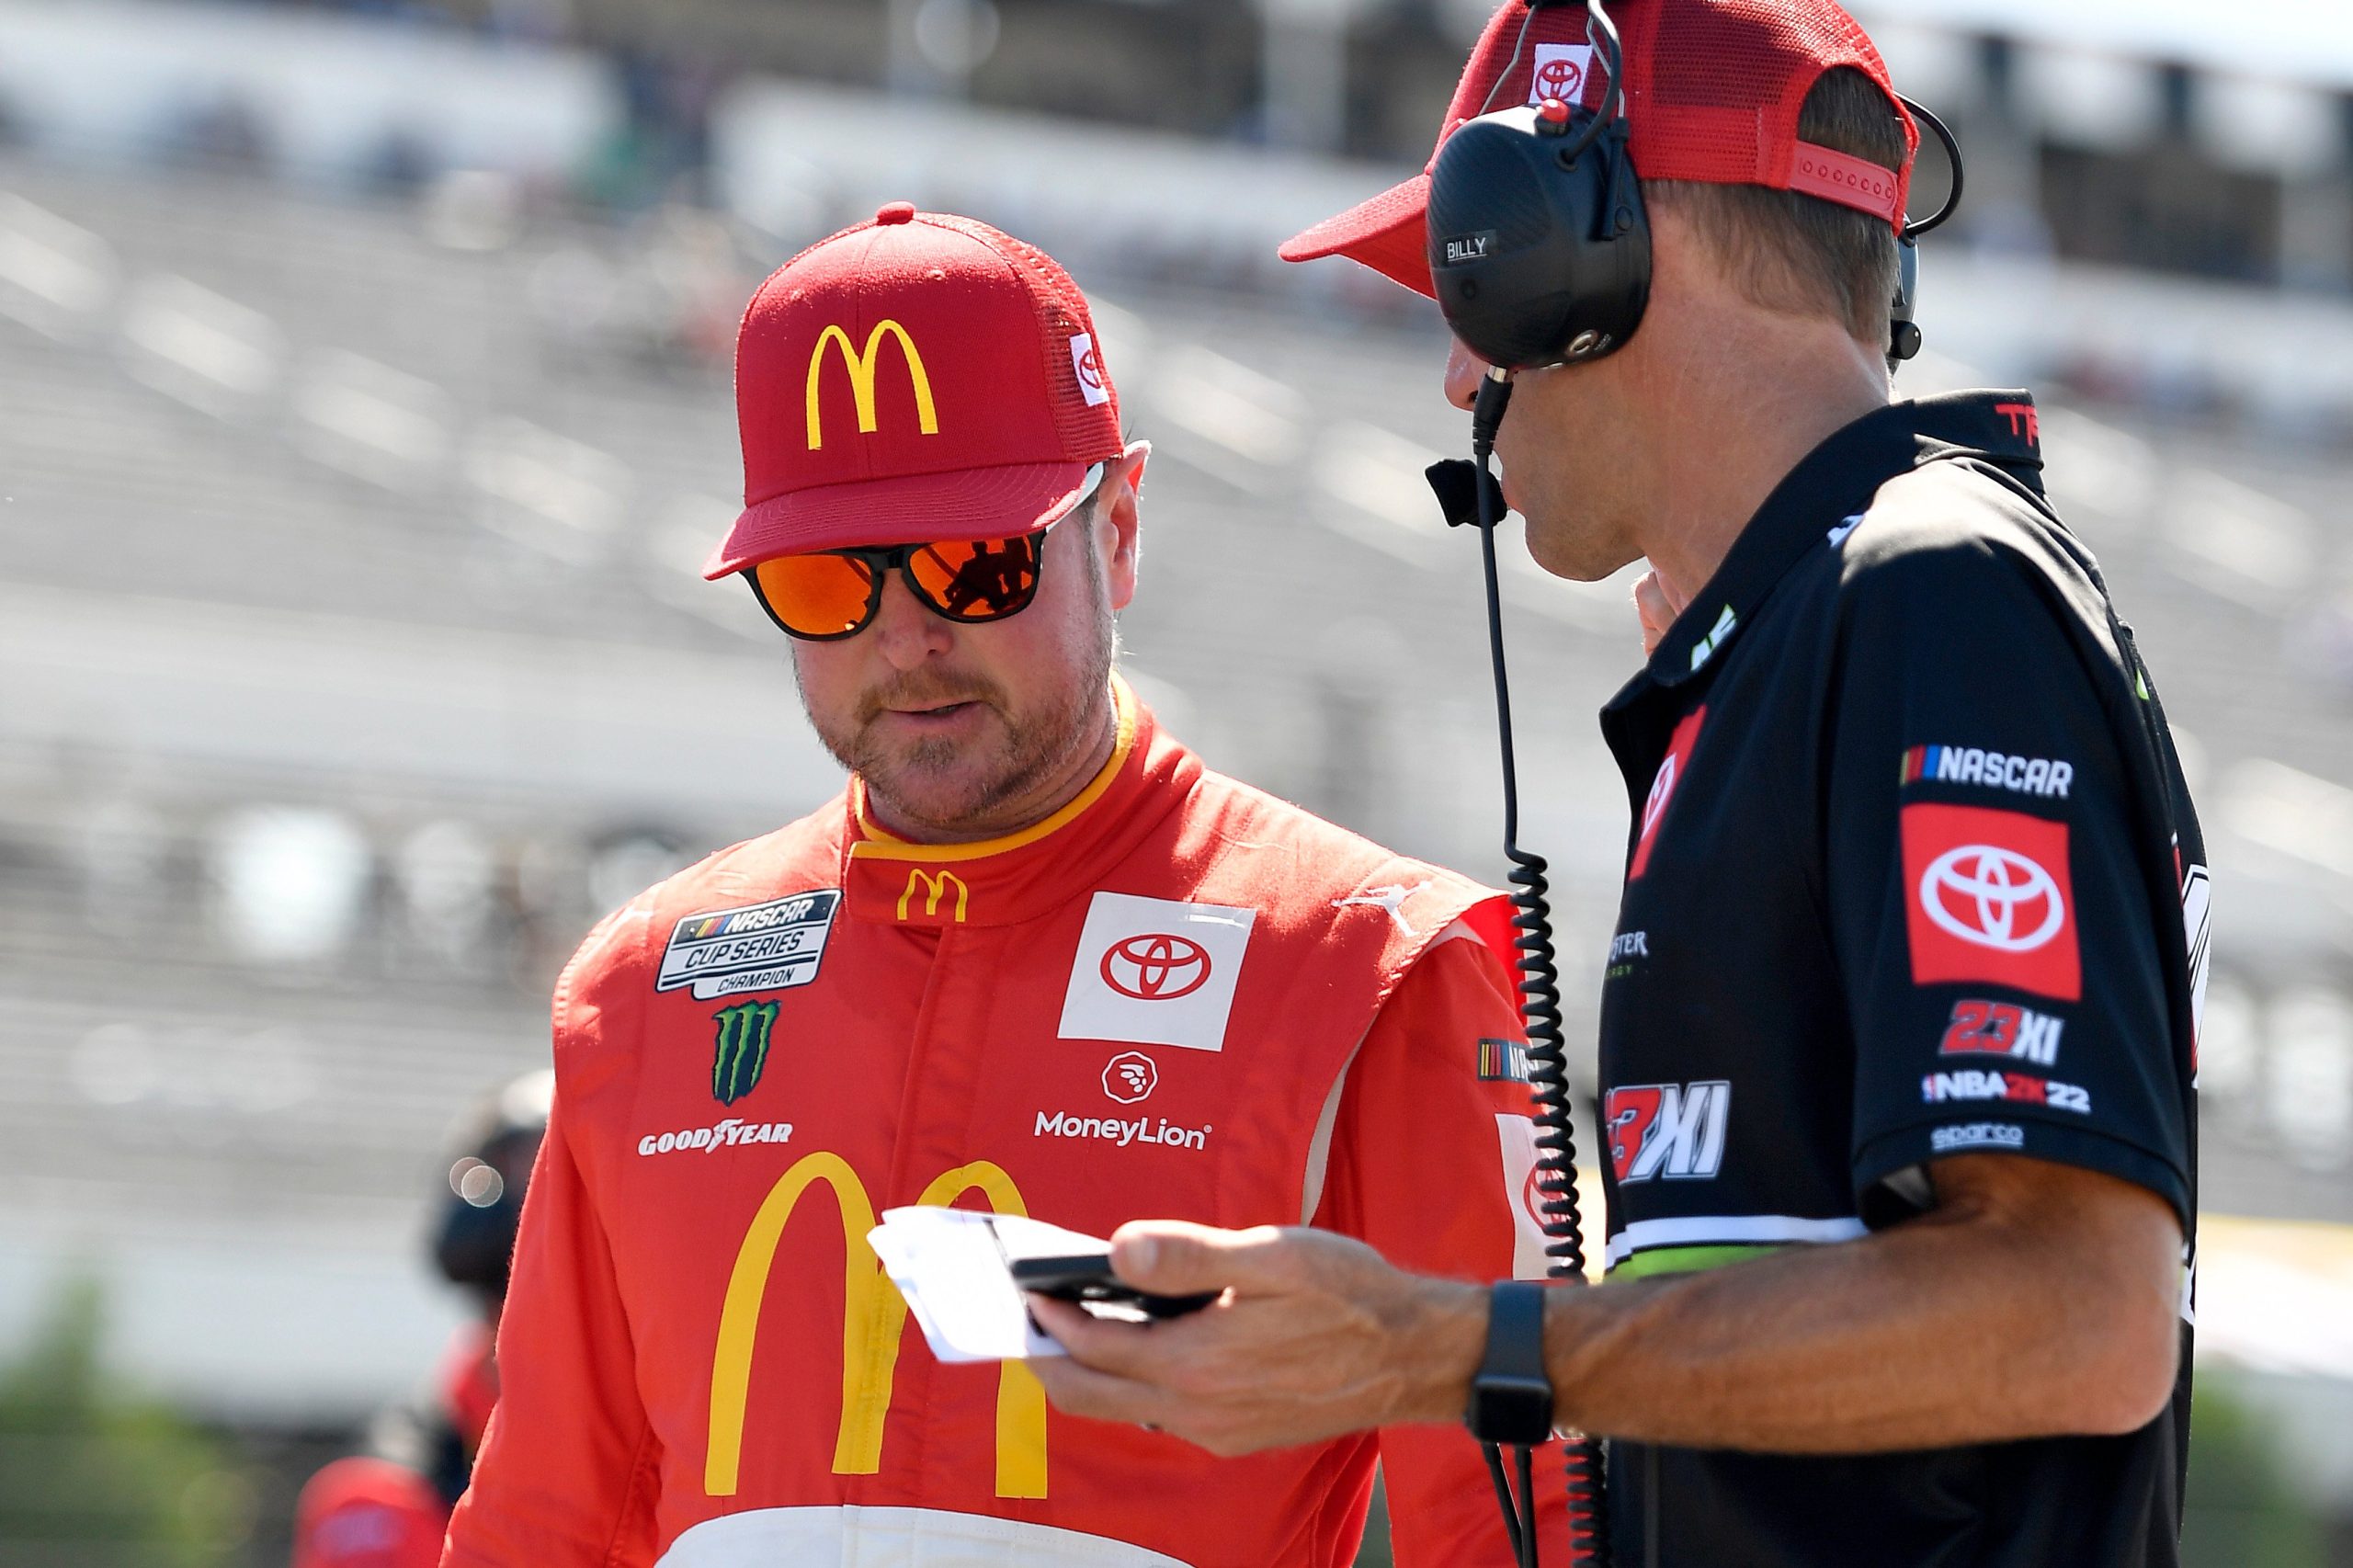 LONG POND, PENNSYLVANIA - JULY 23: Kurt Busch, driver of the #45 McDonald's Toyota, works with a crew member during qualifying for the NASCAR Cup Series M&M's Fan Appreciation 400 at Pocono Raceway on July 23, 2022 in Long Pond, Pennsylvania. (Photo by Logan Riely/Getty Images)